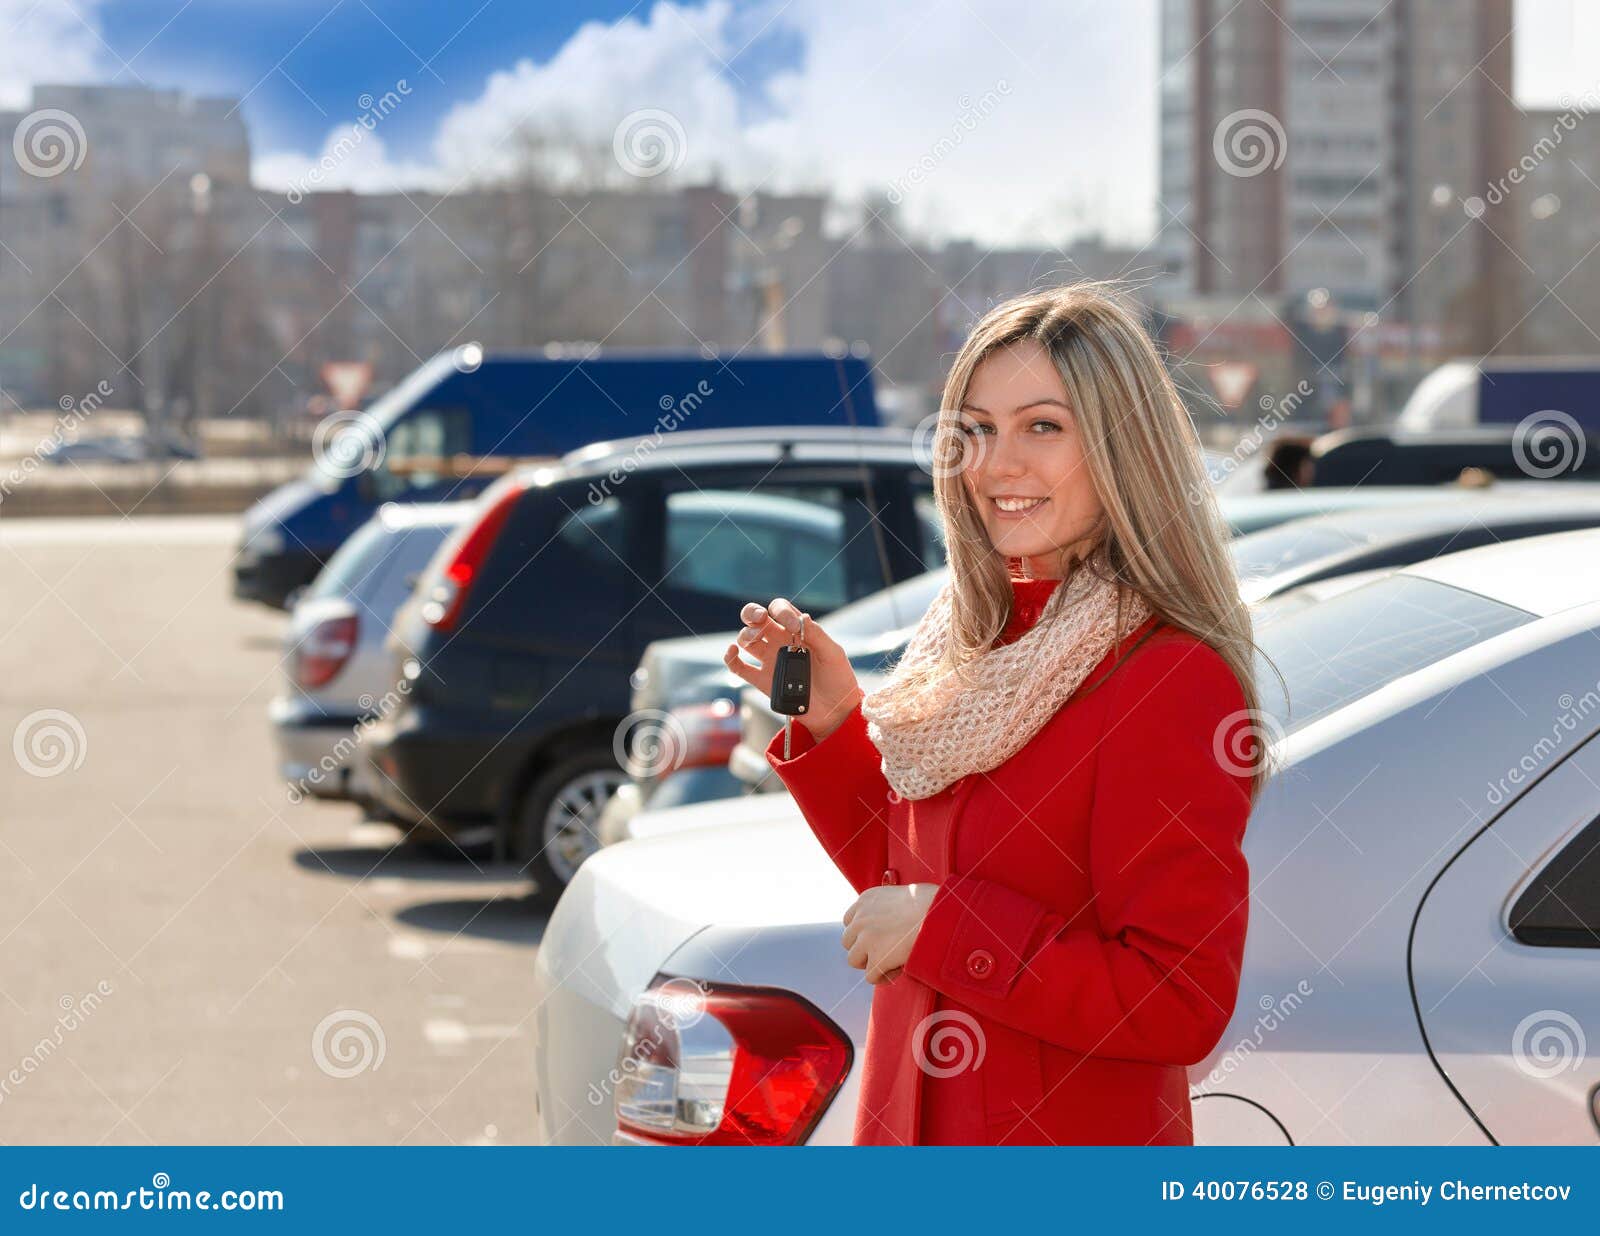 Girl and car stock photo. Image of service, gladness - 40076528